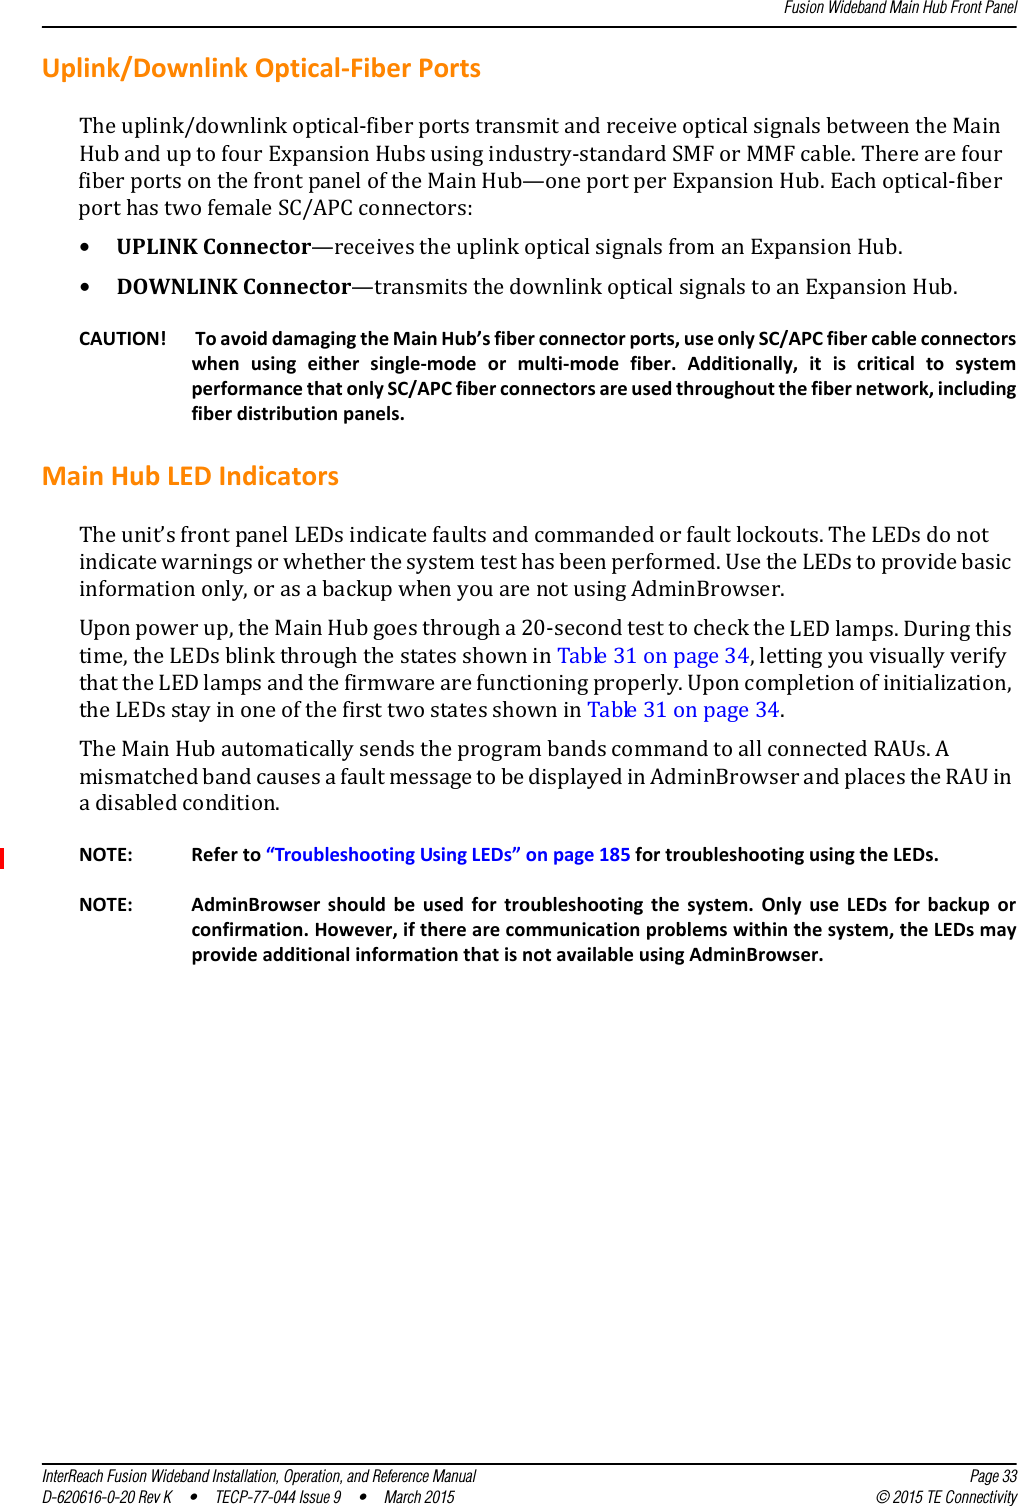 Fusion Wideband Main Hub Front PanelInterReach Fusion Wideband Installation, Operation, and Reference Manual Page 33D-620616-0-20 Rev K  •  TECP-77-044 Issue 9  •  March 2015 © 2015 TE ConnectivityUplink/Downlink Optical-Fiber PortsThe uplink/downlink optical-fiber ports transmit and receive optical signals between the Main Hub and up to four Expansion Hubs using industry-standard SMF or MMF cable. There are four fiber ports on the front panel of the Main Hub—one port per Expansion Hub. Each optical-fiber port has two female SC/APC connectors:•UPLINK Connector—receives the uplink optical signals from an Expansion Hub.•DOWNLINK Connector—transmits the downlink optical signals to an Expansion Hub.CAUTION!  To avoid damaging the Main Hub’s fiber connector ports, use only SC/APC fiber cable connectors when using either single-mode or multi-mode fiber. Additionally, it is critical to system performance that only SC/APC fiber connectors are used throughout the fiber network, including fiber distribution panels.Main Hub LED IndicatorsThe unit’s front panel LEDs indicate faults and commanded or fault lockouts. The LEDs do not indicate warnings or whether the system test has been performed. Use the LEDs to provide basic information only, or as a backup when you are not using AdminBrowser.Upon power up, the Main Hub goes through a 20-second test to check the LED lamps. During this time, the LEDs blink through the states shown in Table 31 on page 34, letting you visually verify that the LED lamps and the firmware are functioning properly. Upon completion of initialization, the LEDs stay in one of the first two states shown in Table 31 on page 34. The Main Hub automatically sends the program bands command to all connected RAUs. A mismatched band causes a fault message to be displayed in AdminBrowser and places the RAU in a disabled condition.NOTE: Refer to “Troubleshooting Using LEDs” on page 185 for troubleshooting using the LEDs.NOTE: AdminBrowser should be used for troubleshooting the system. Only use LEDs for backup or confirmation. However, if there are communication problems within the system, the LEDs may provide additional information that is not available using AdminBrowser.